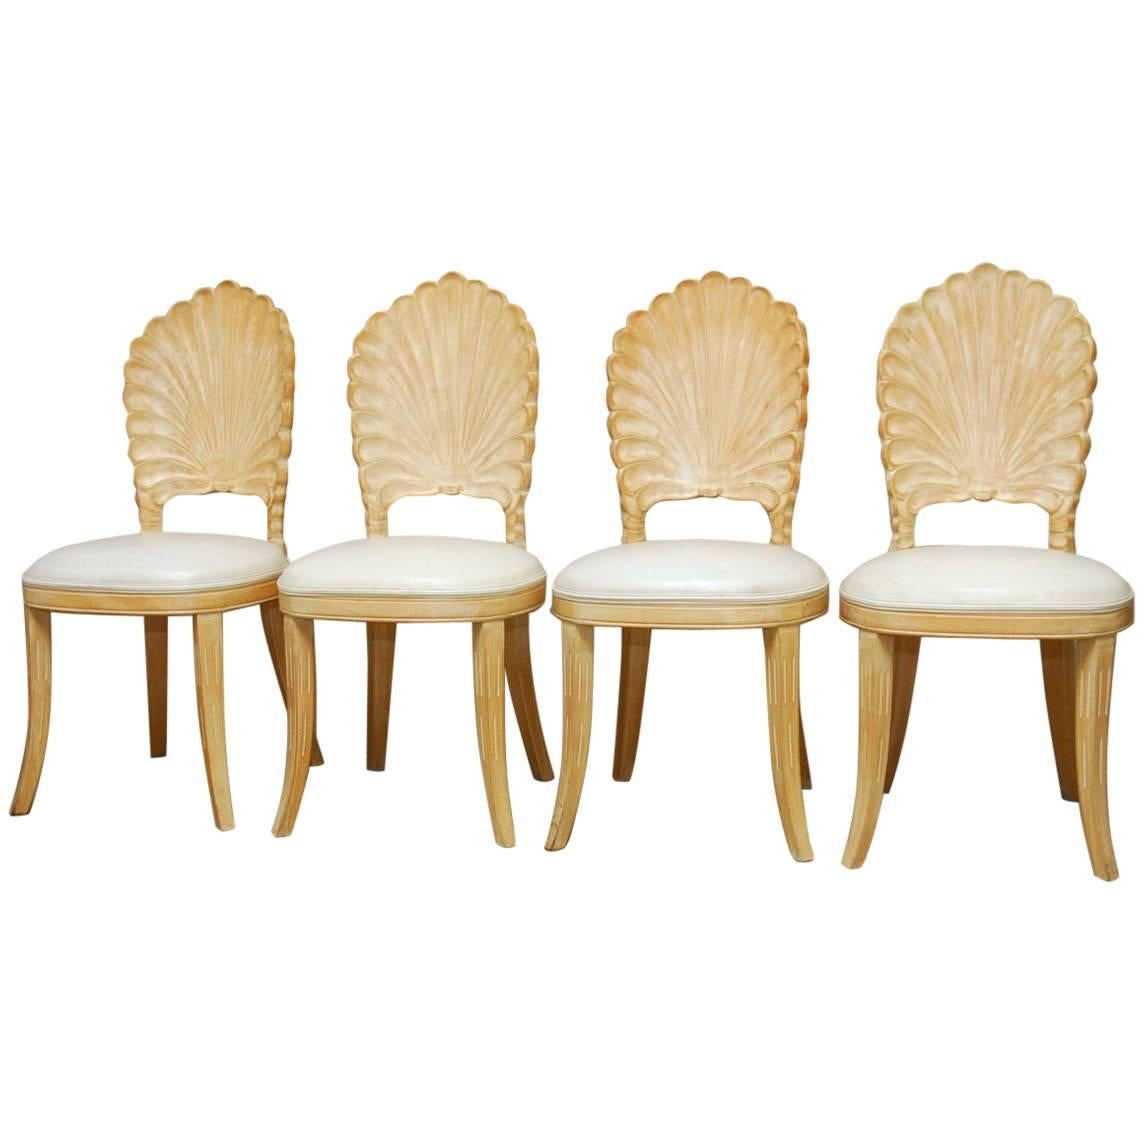 Set of Four Venetian Grotto Style Shell Back Dining Chairs